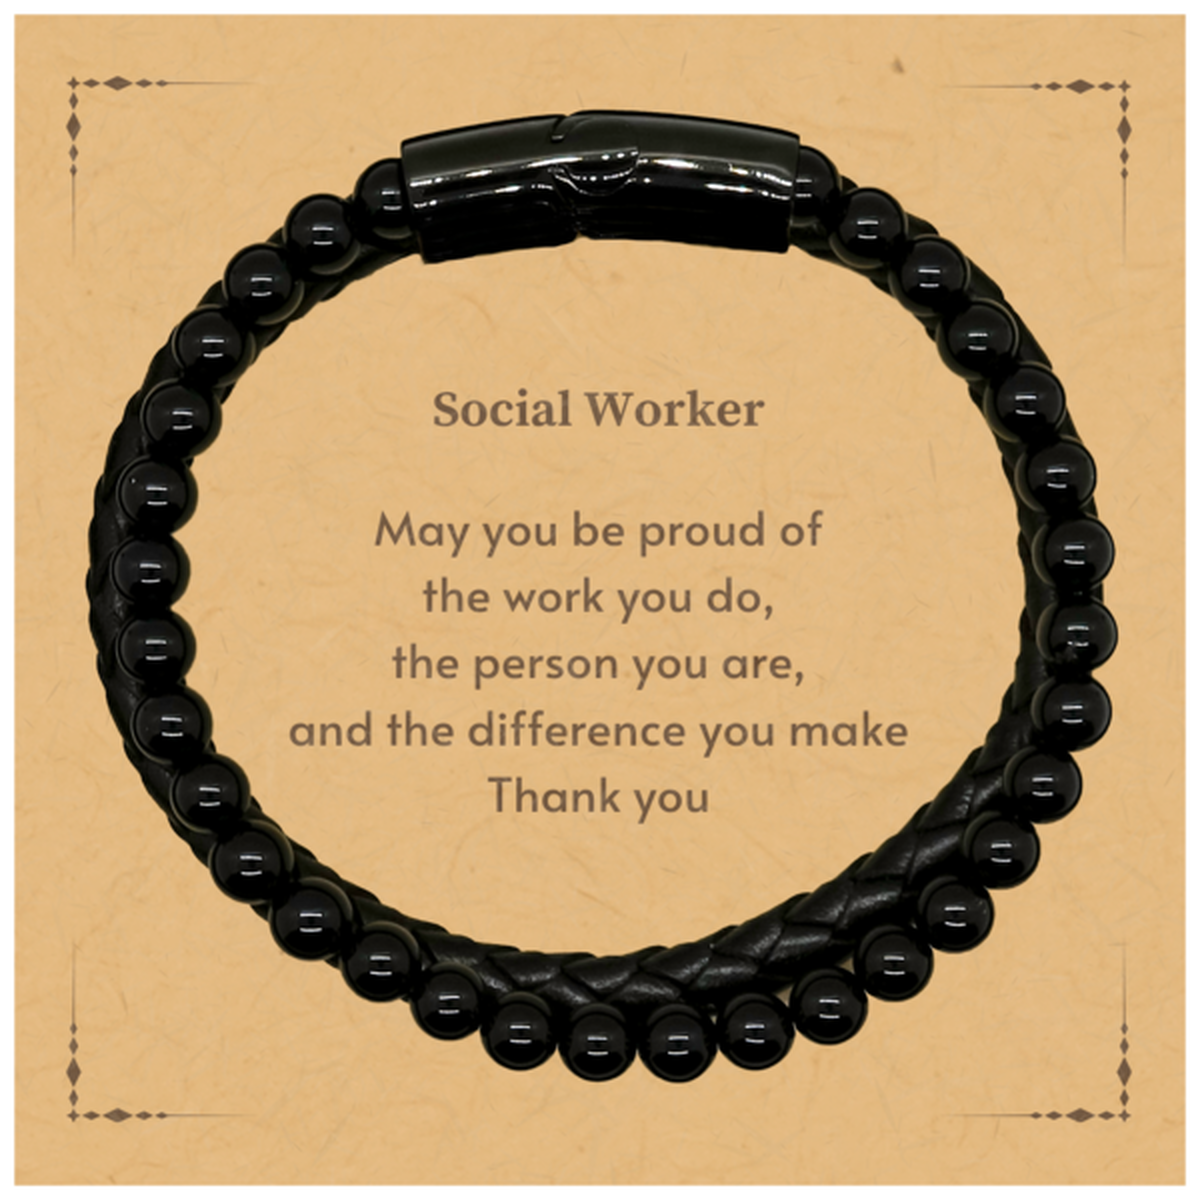 Heartwarming Stone Leather Bracelets Retirement Coworkers Gifts for Social Worker, Social Worker May You be proud of the work you do, the person you are Gifts for Boss Men Women Friends